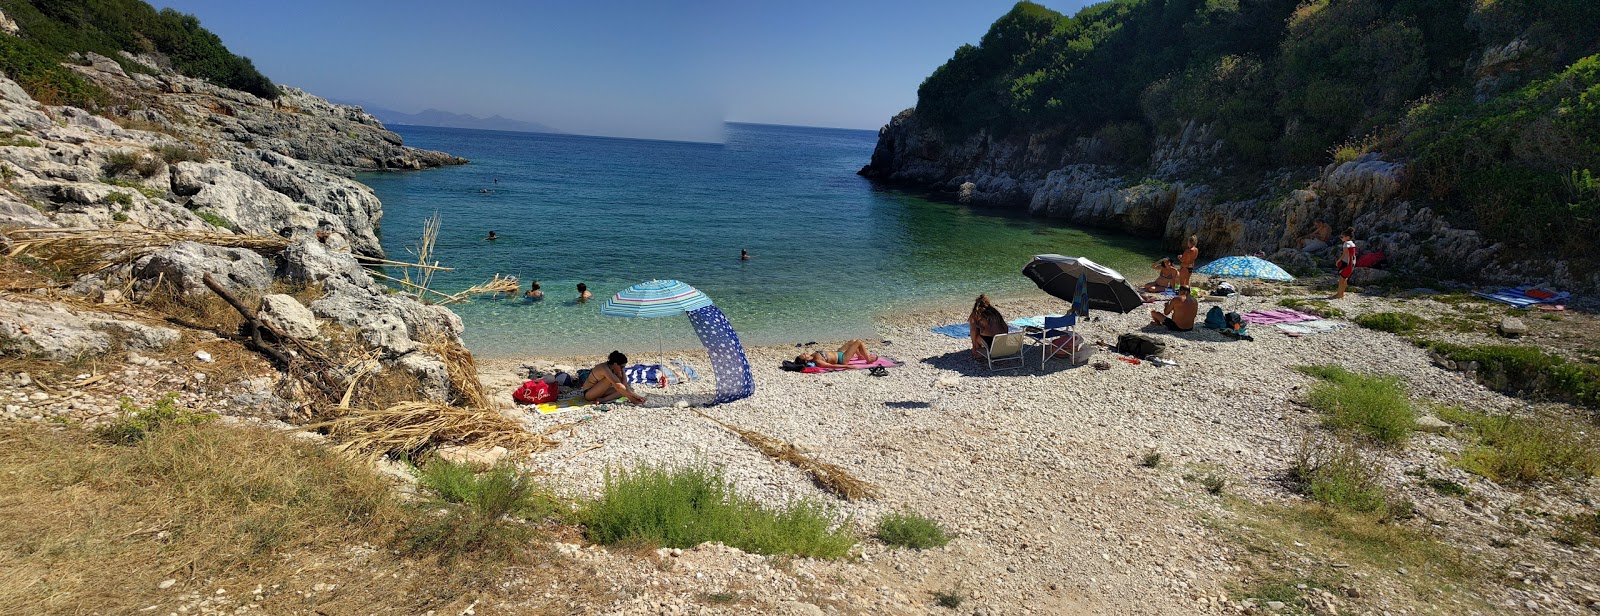 Photo of Climati beach backed by cliffs